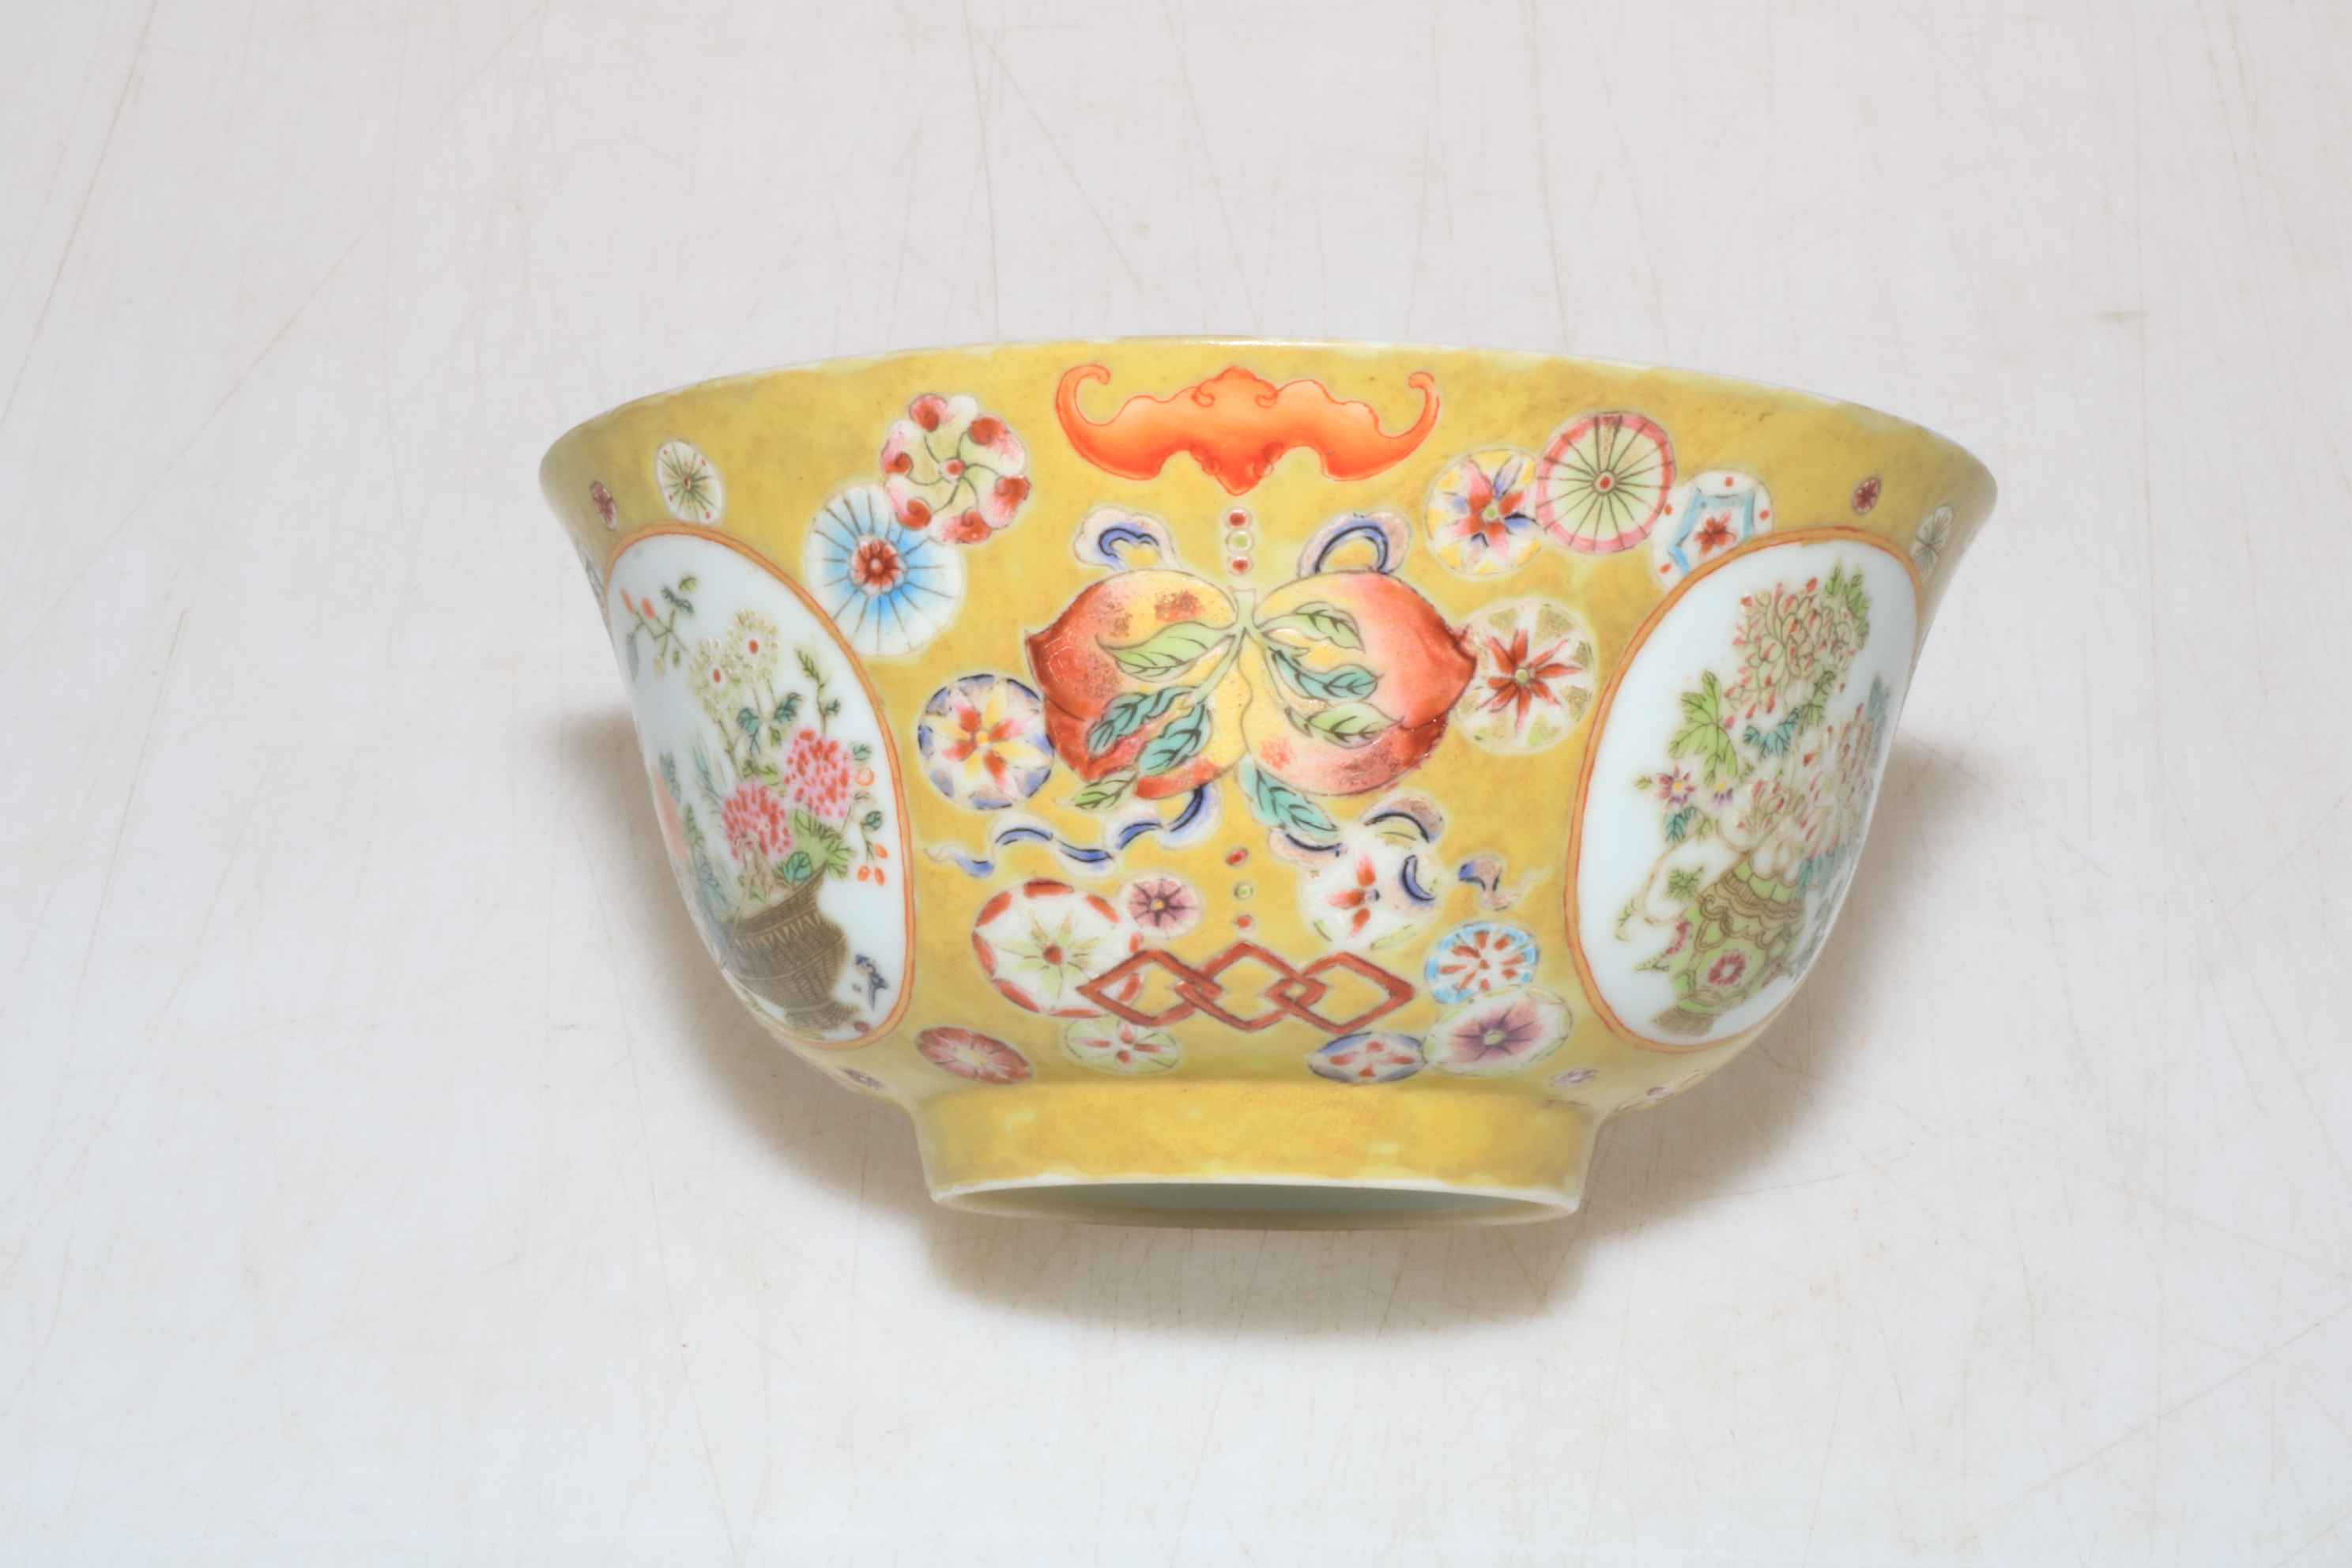 Small Chinese porcelain bowl with floral design on yellow ground, Qianlong mark to base, - Image 2 of 4